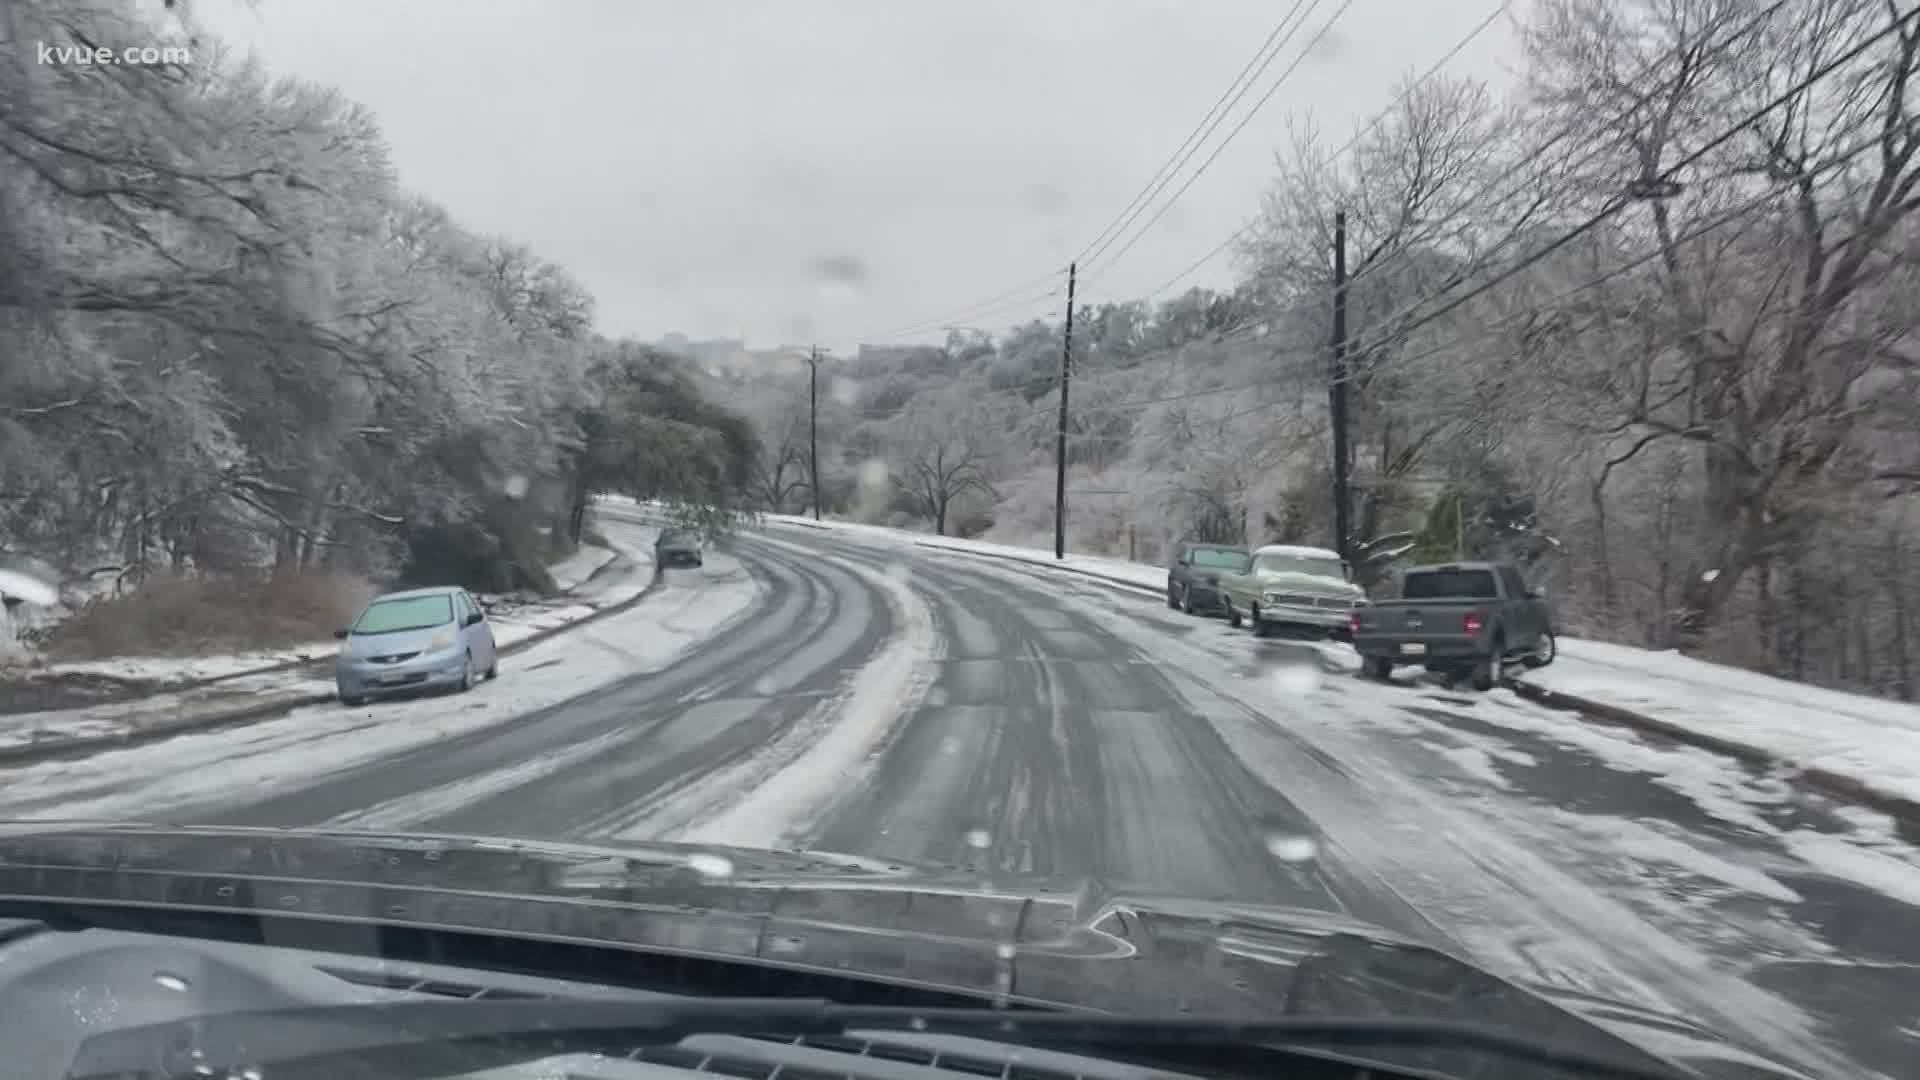 The winter storms made driving on local roads almost impossible. Two agencies that take care of roads in the area are looking at what could've been done differently.